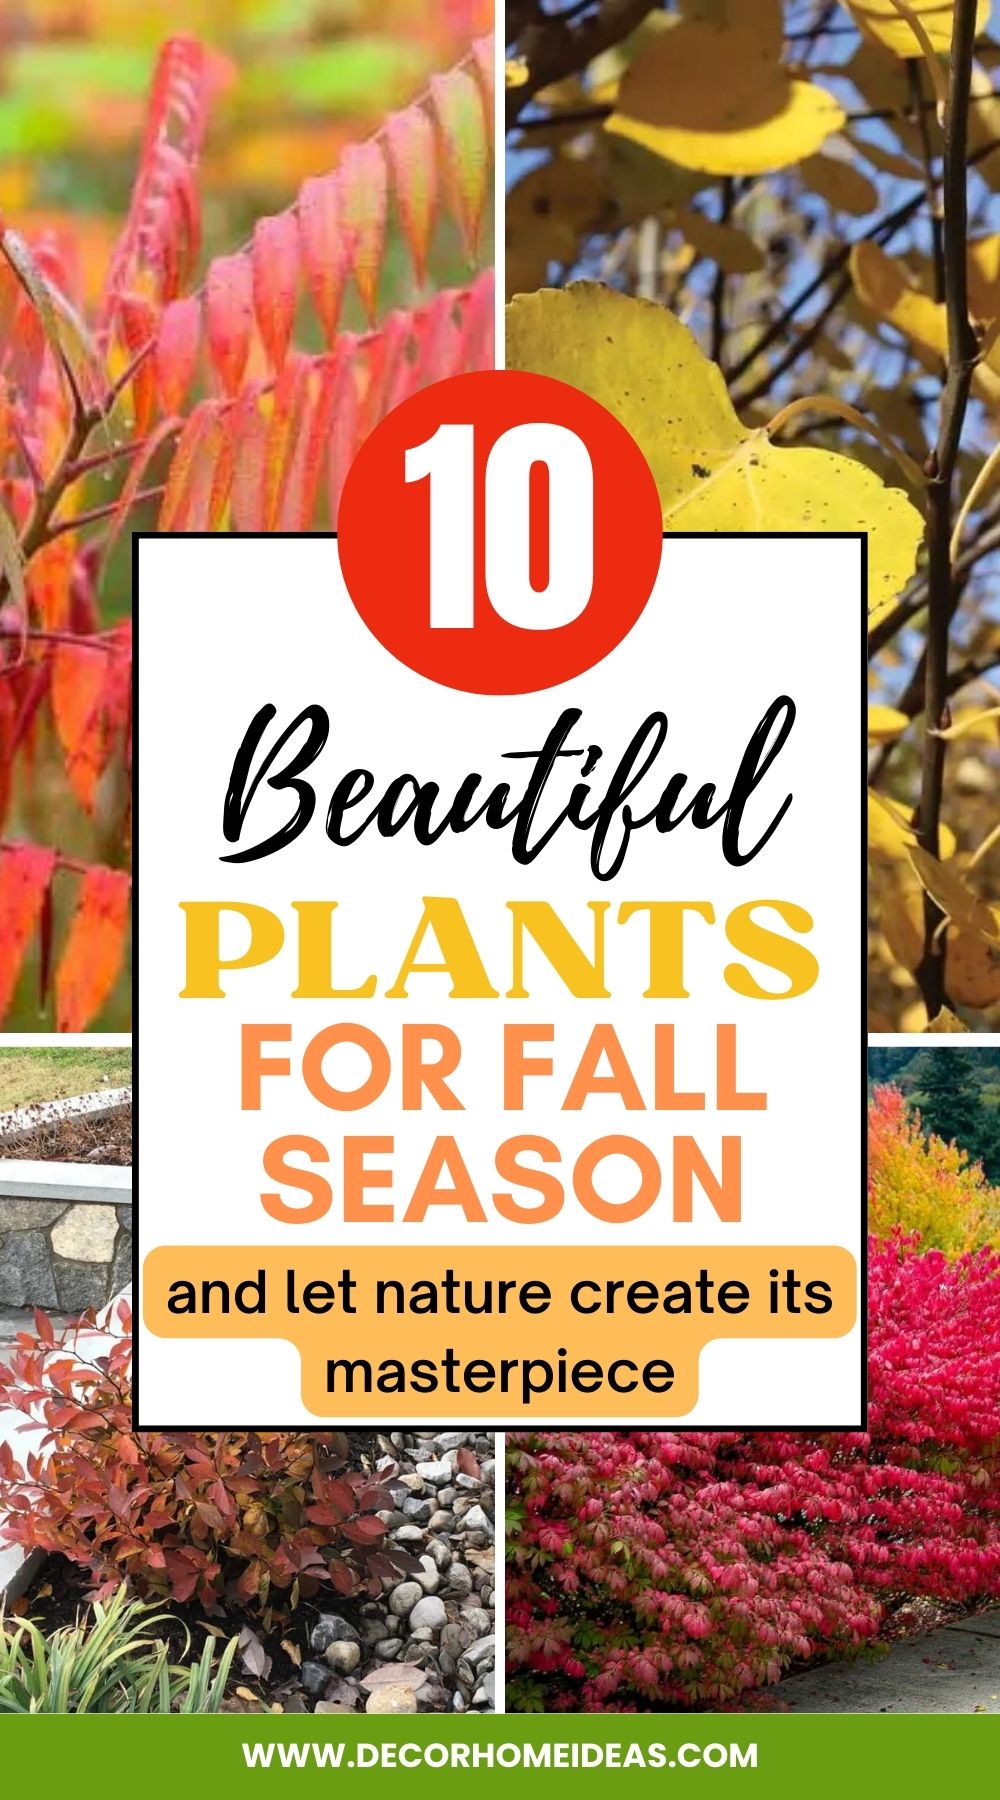 Check out this list of the 10 best stunning plants for the fall season. Find the perfect addition to your garden and enjoy the beauty of autumn.